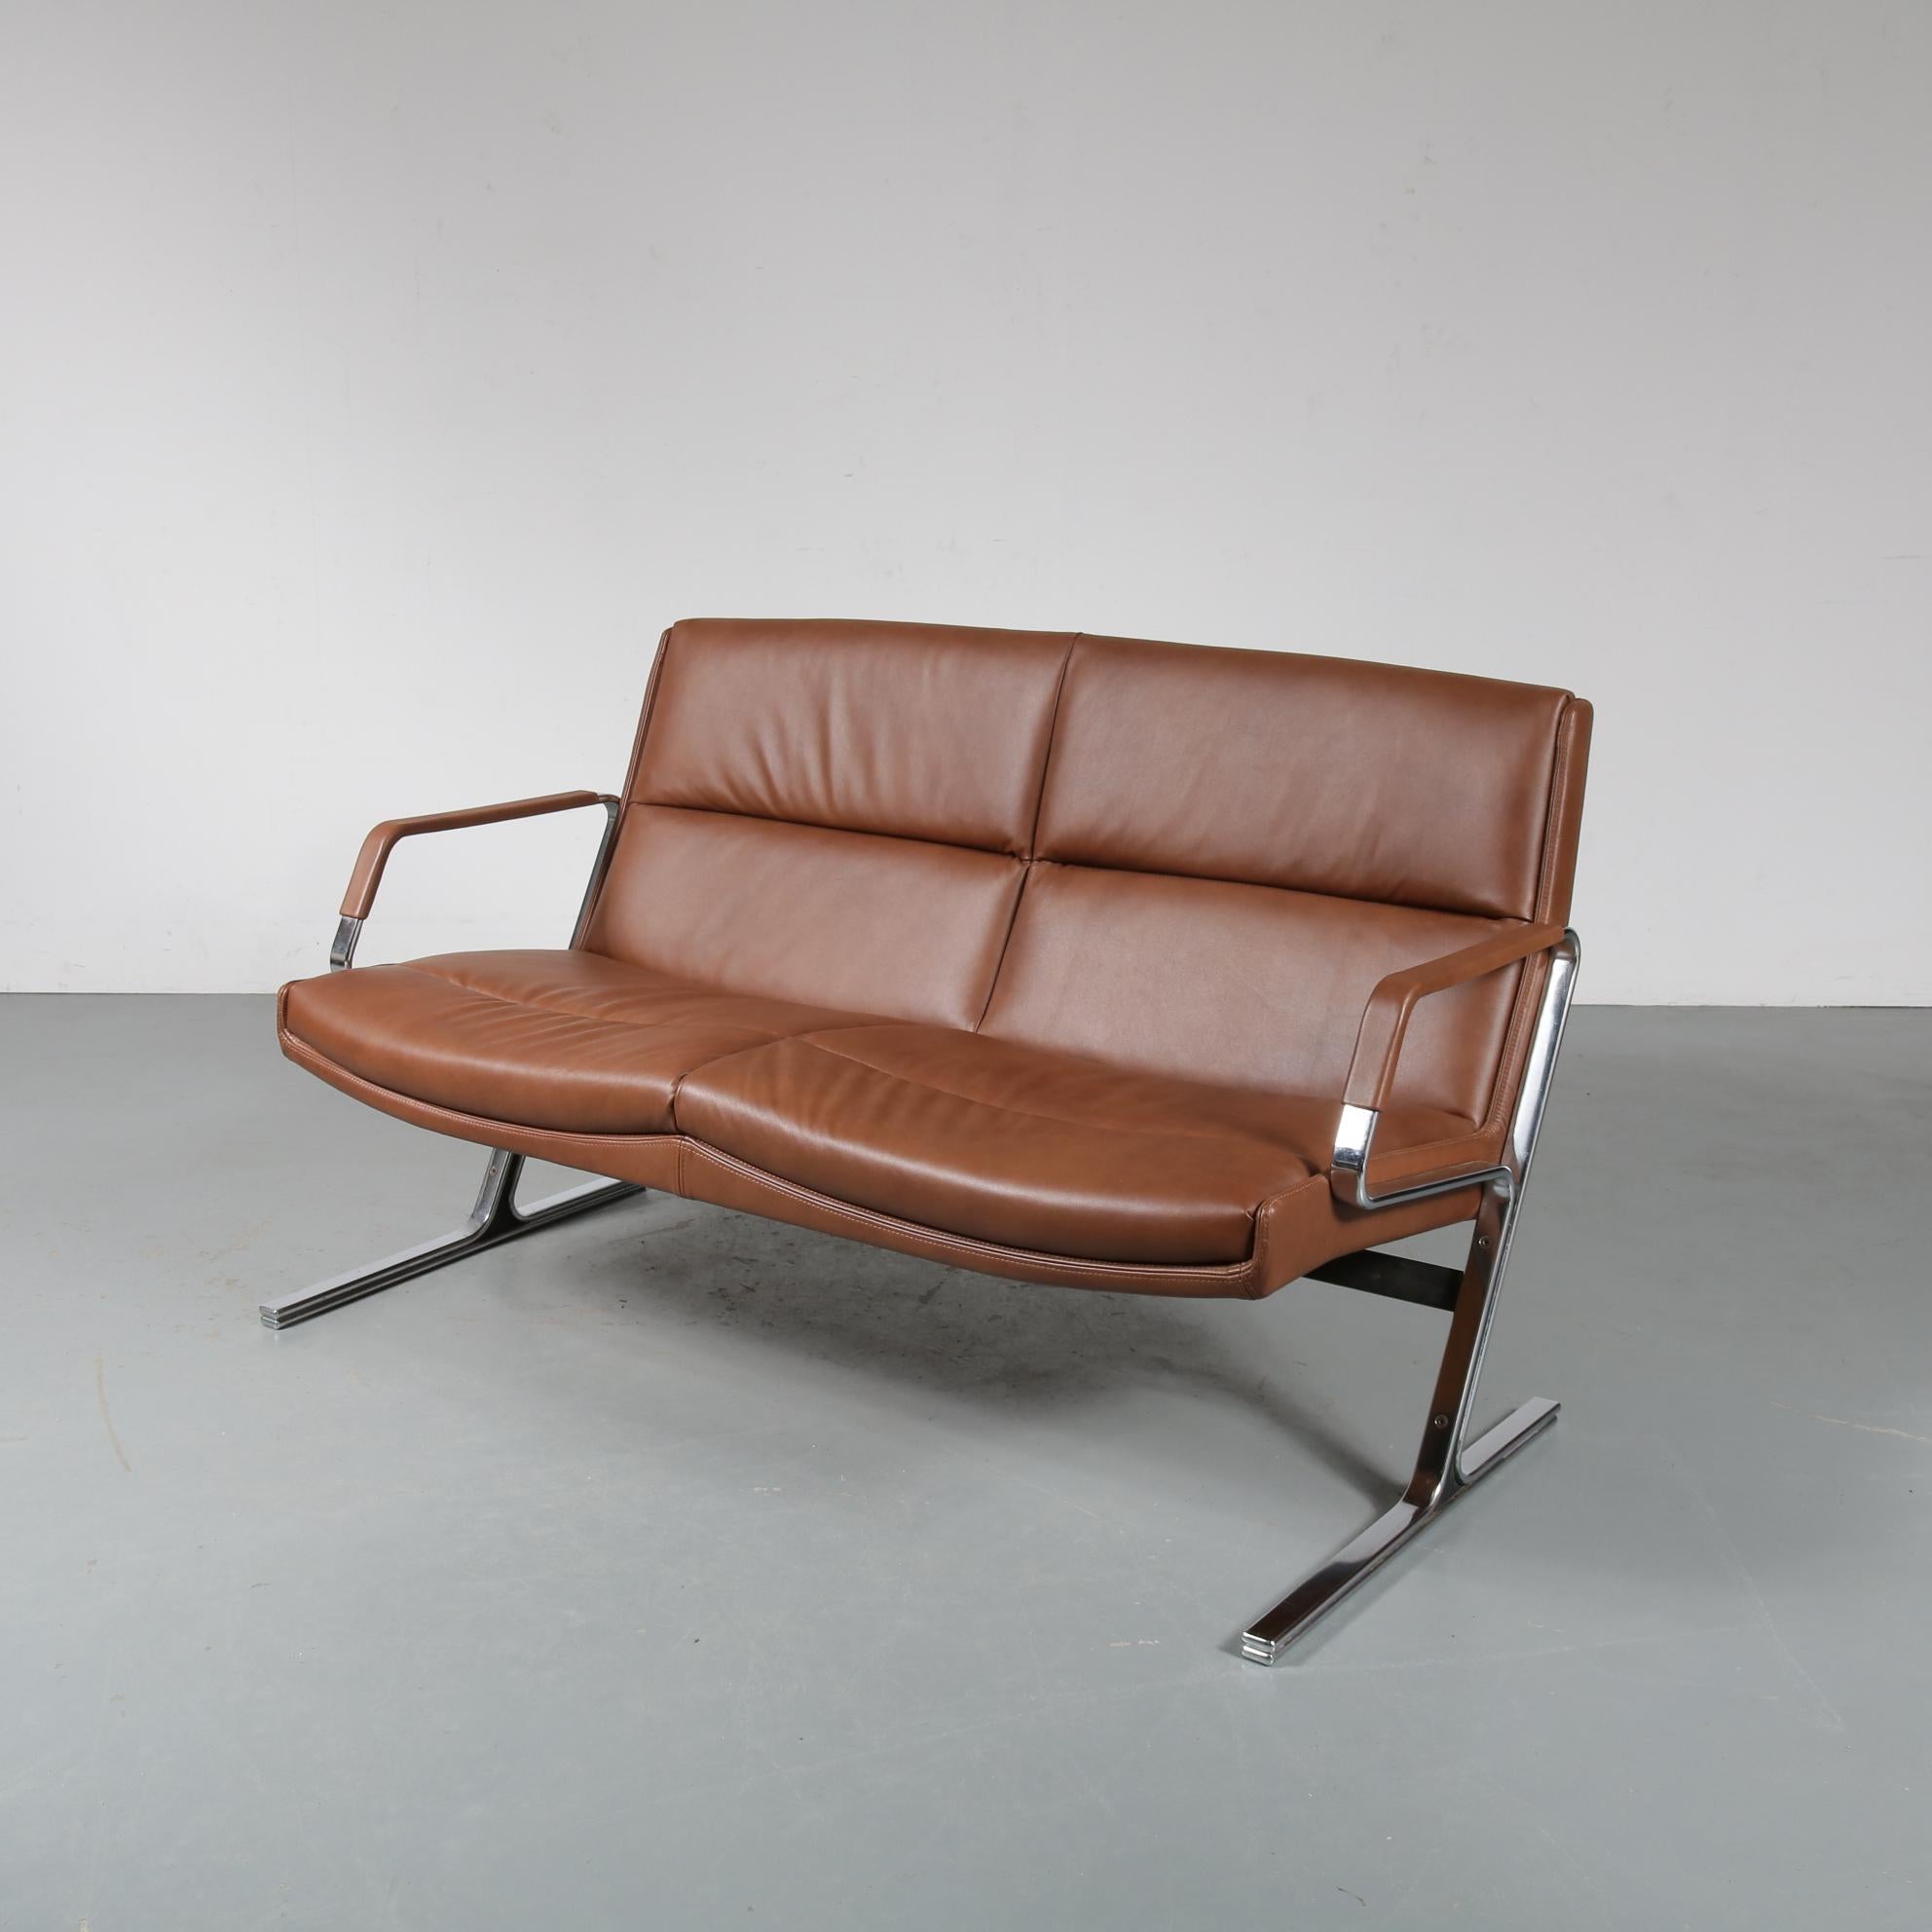 A beautiful two-seat sofa designed by Preben Fabricius, manufactured by Walter Knoll in Germany, circa 1970.

This stunning piece is newly upholstered in top quality brown leather. This contrasts beautifully to the bright chrome-plated metal